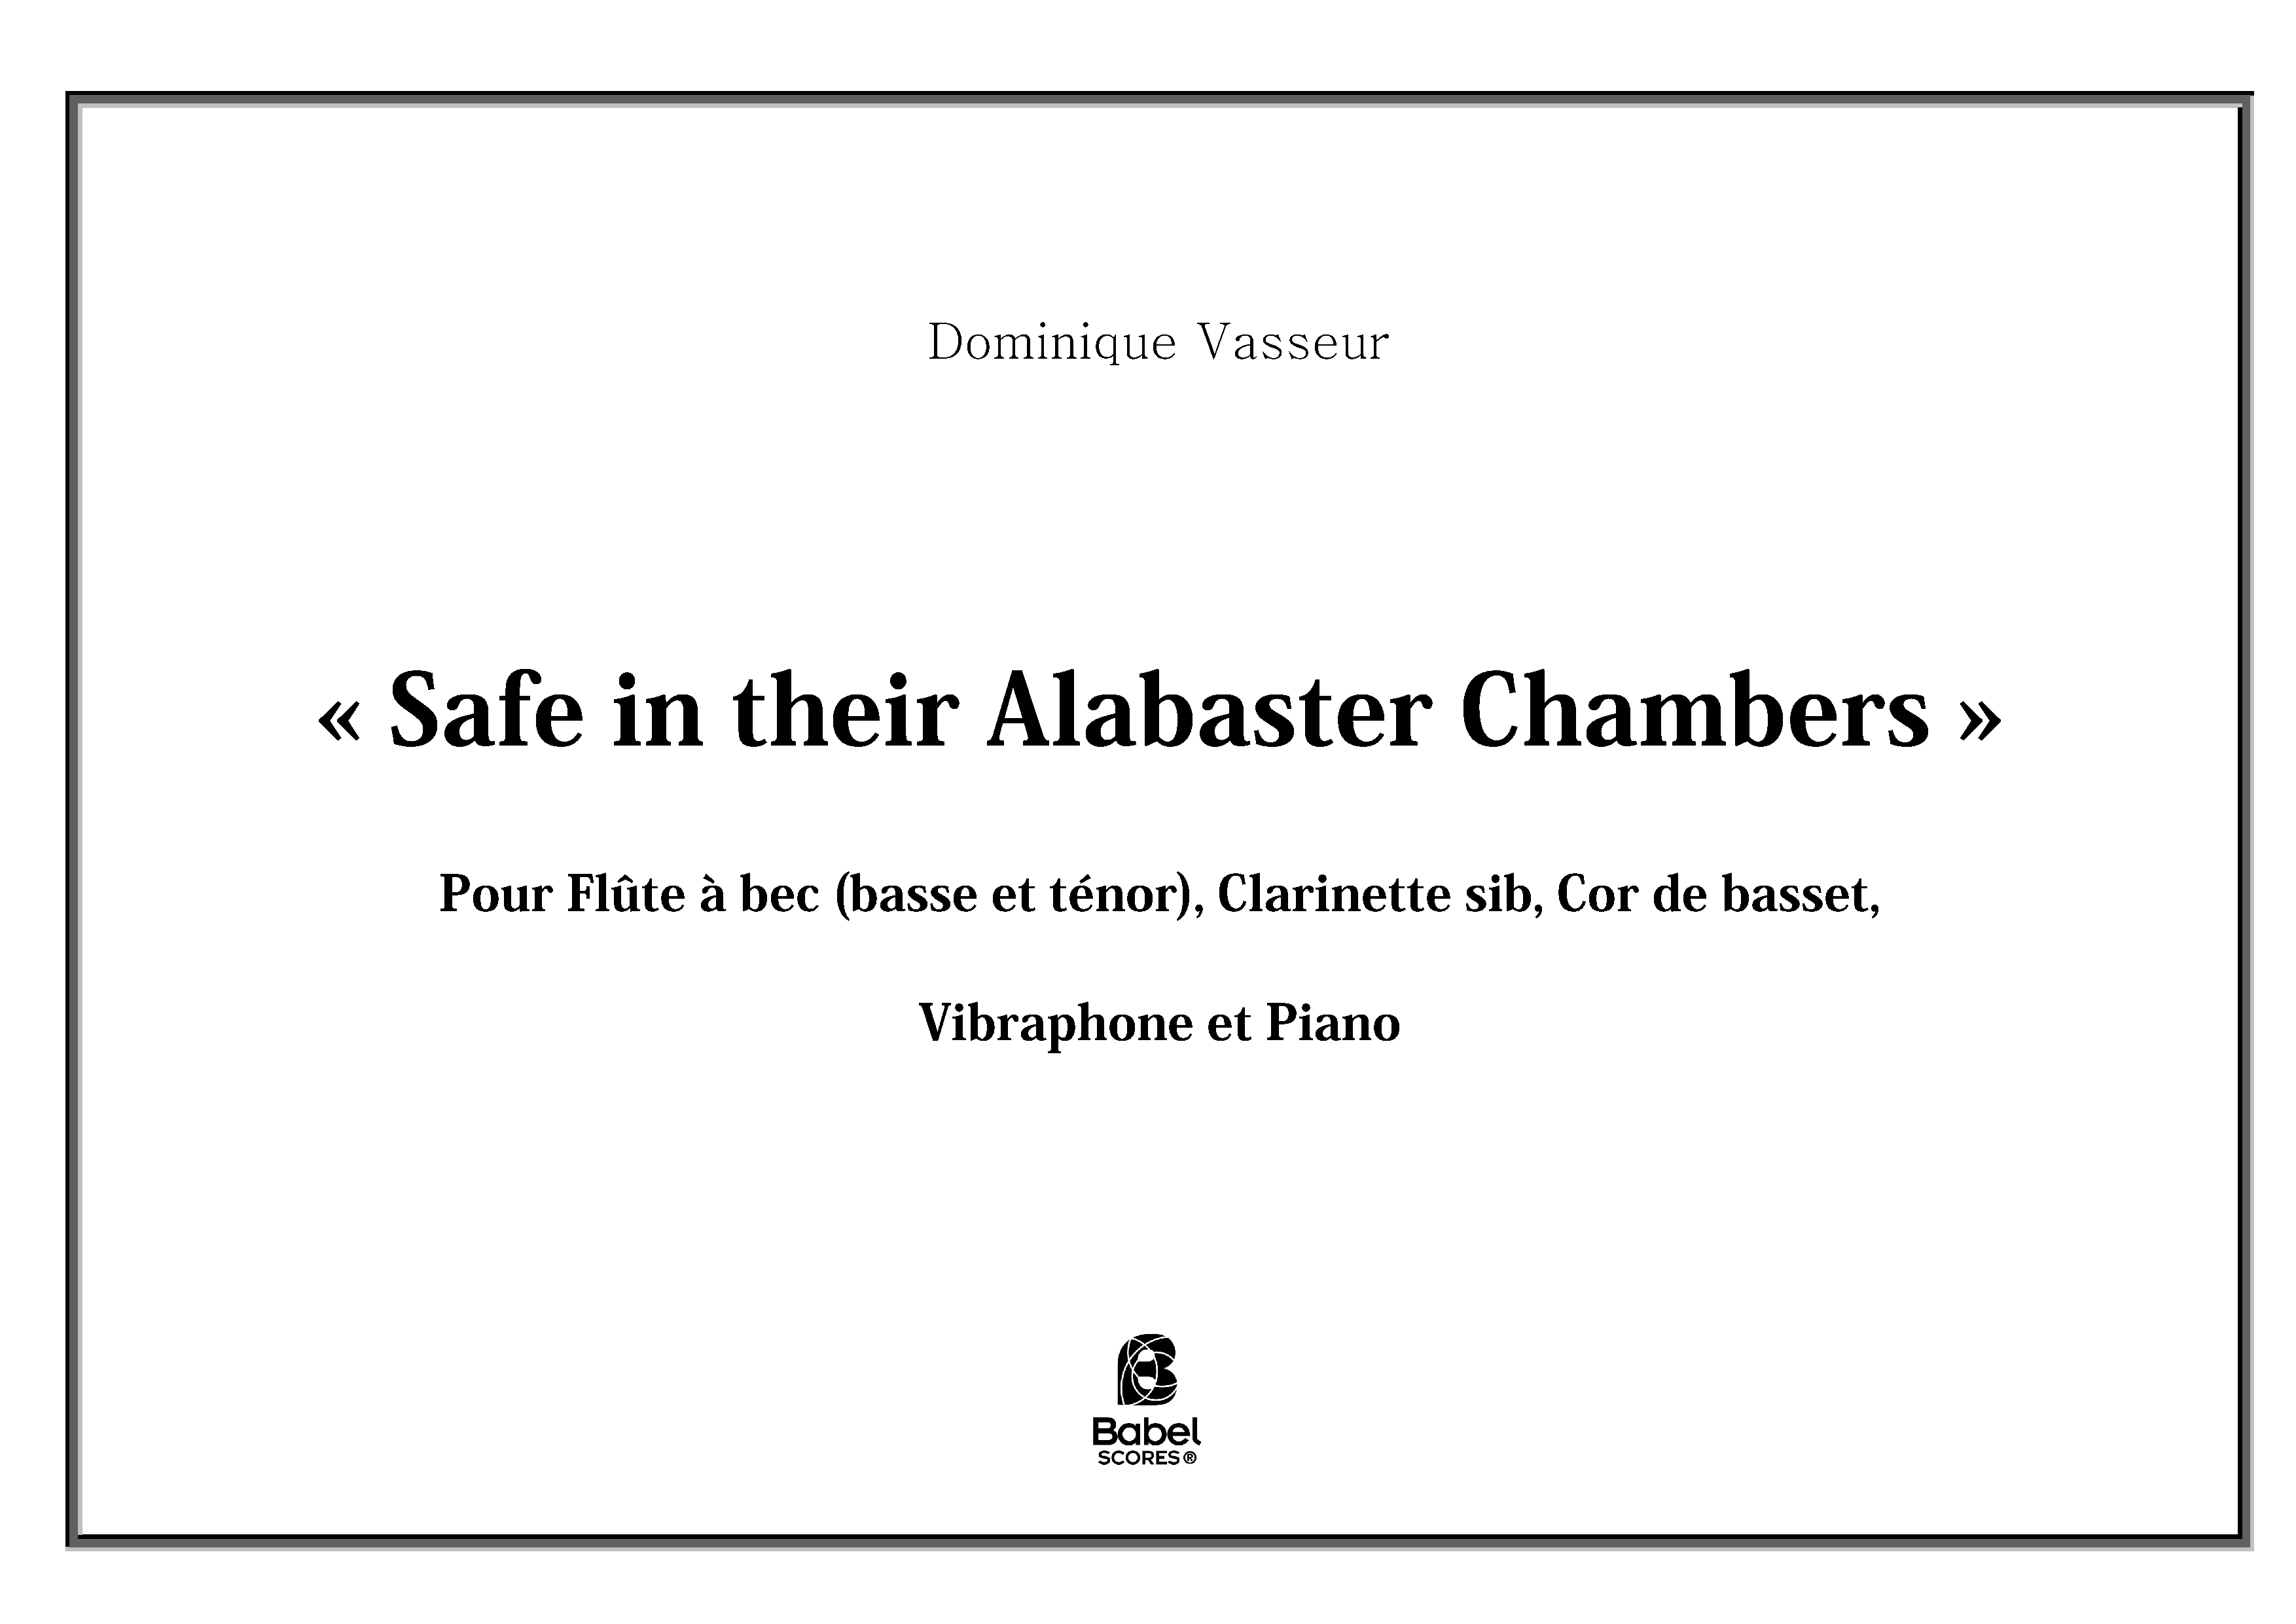 Safe in their Alabaster Chambers 1 85